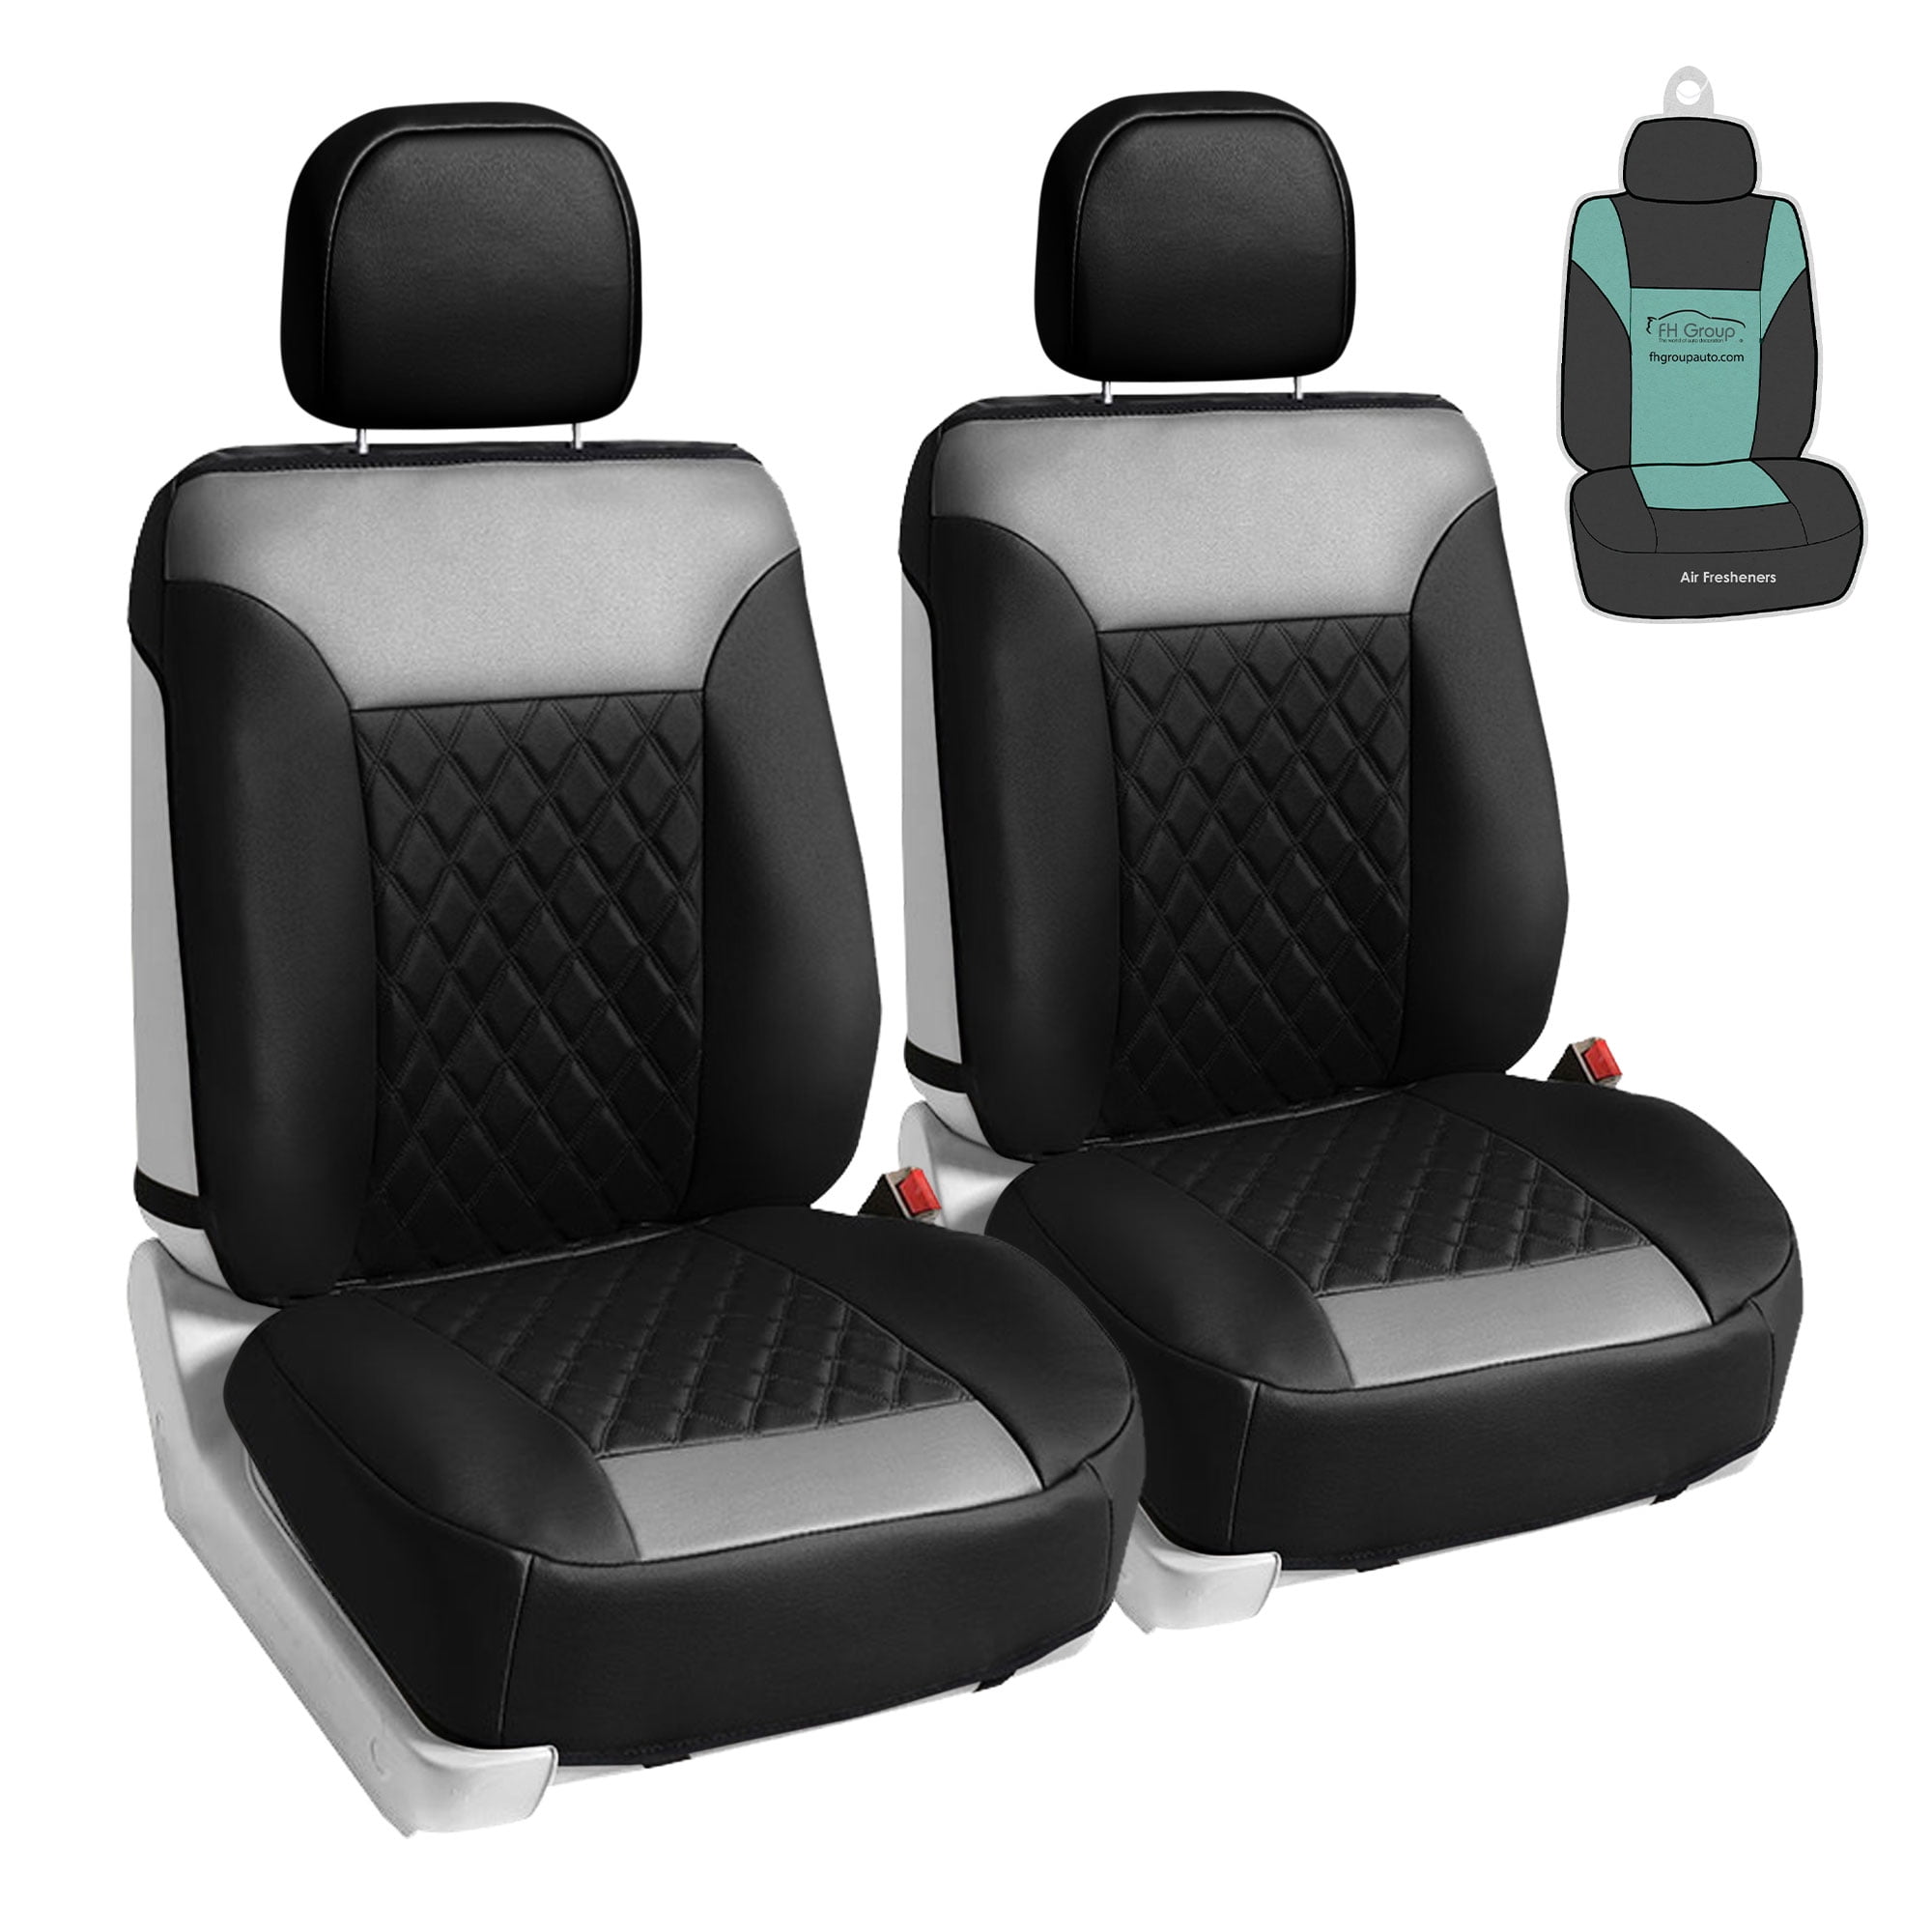 New Car Scent - Air Freshener – Seat Cover Solutions